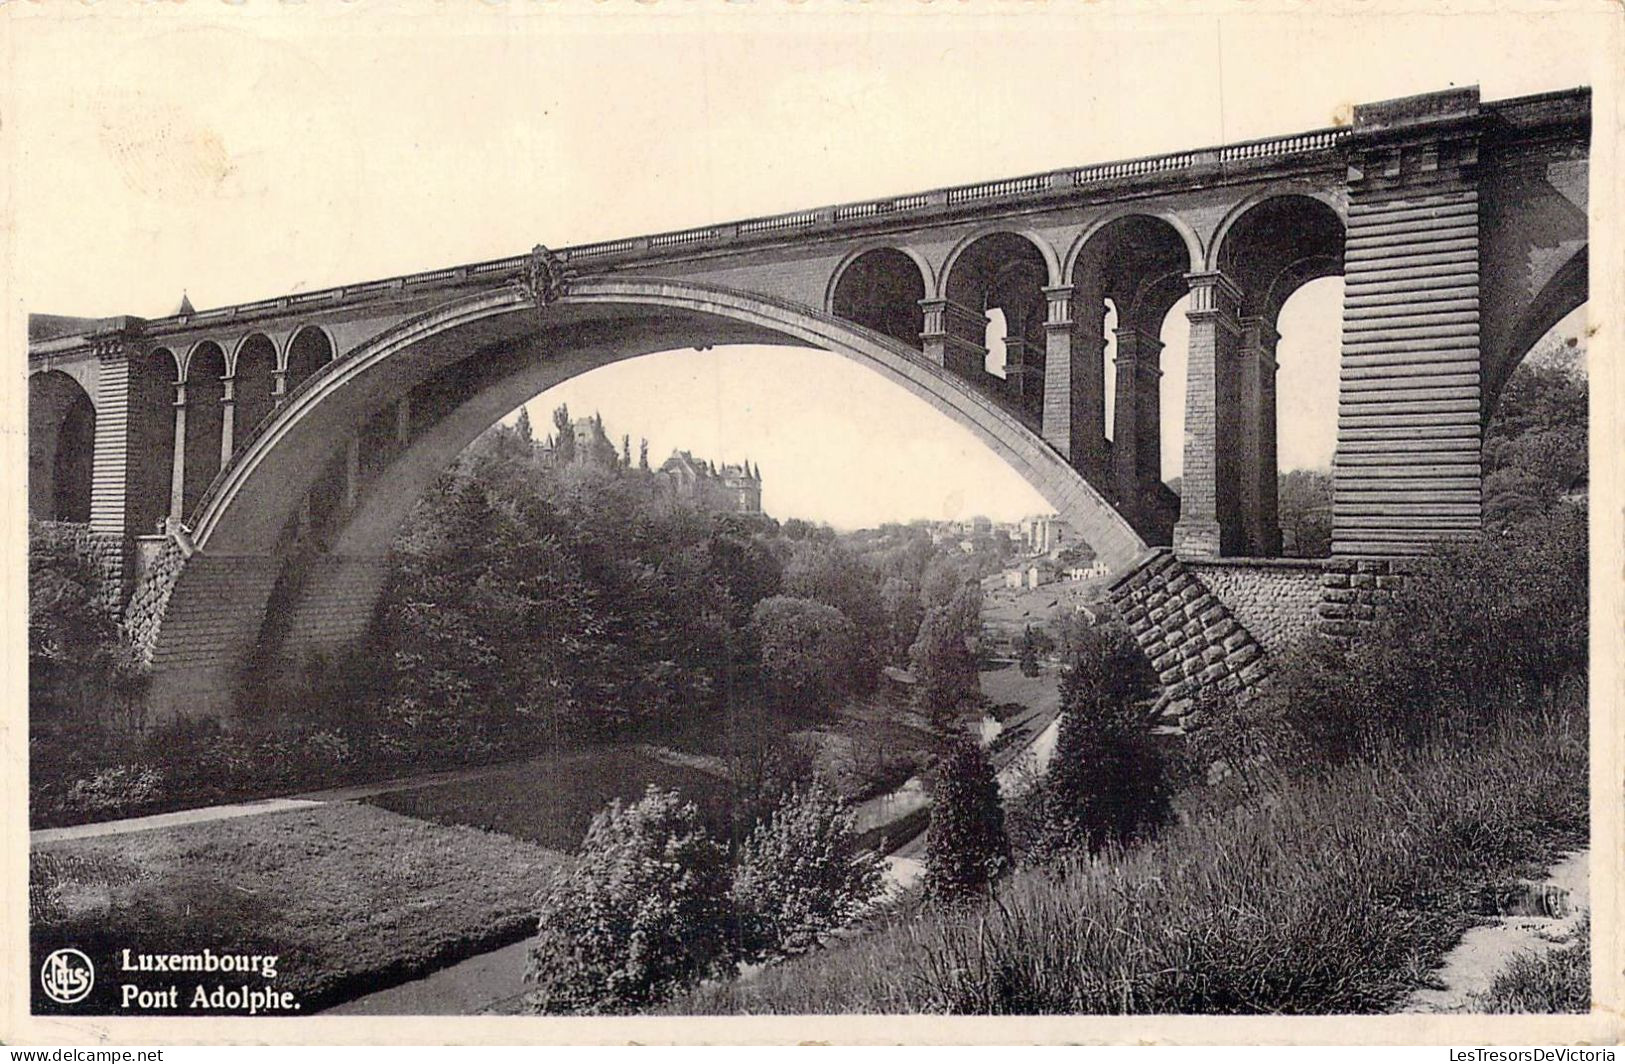 LUXEMBOURG - Pont Adolphe - Carte Postale Ancienne - Luxemburg - Stadt